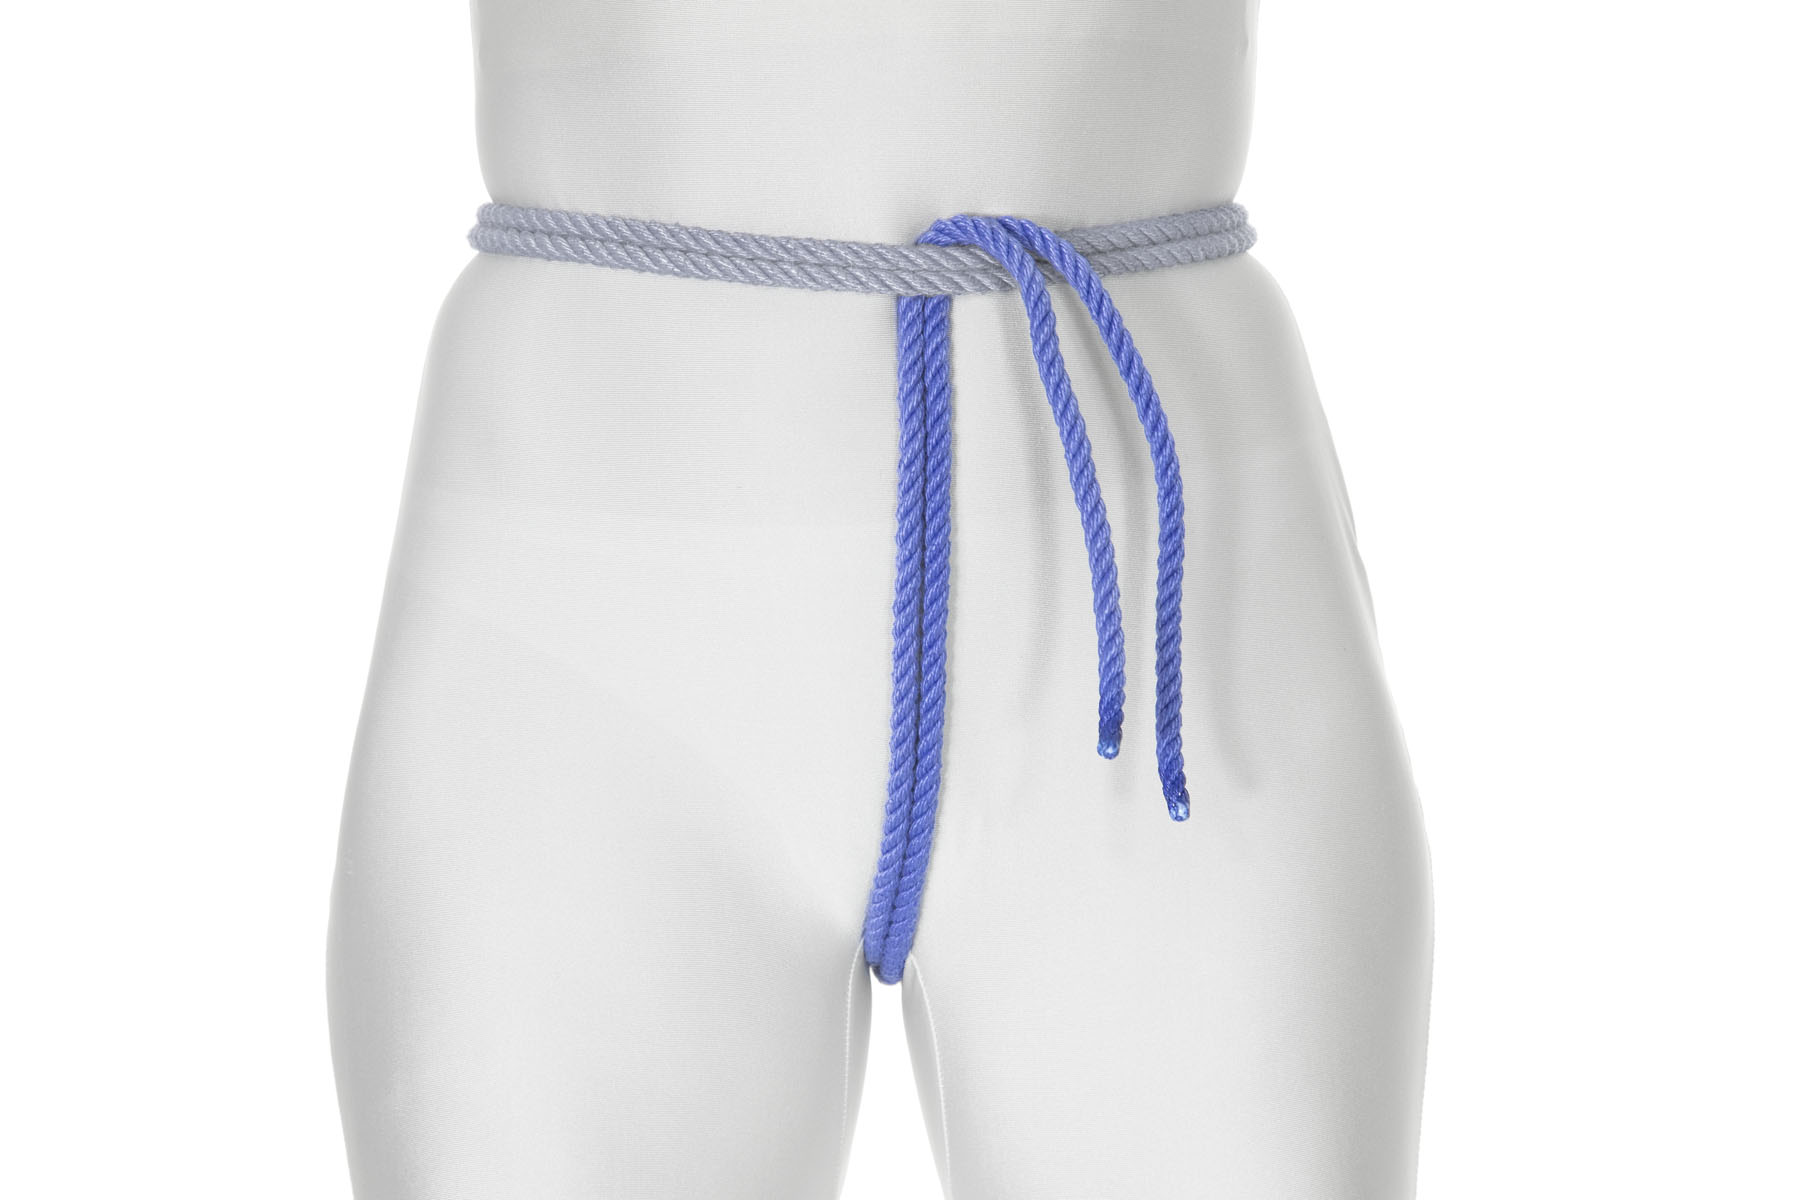 This view is from the front, showing the rope passing between the legs and going up over the crotch to the waist rope. It passes under the waist rope and is pulled snug.